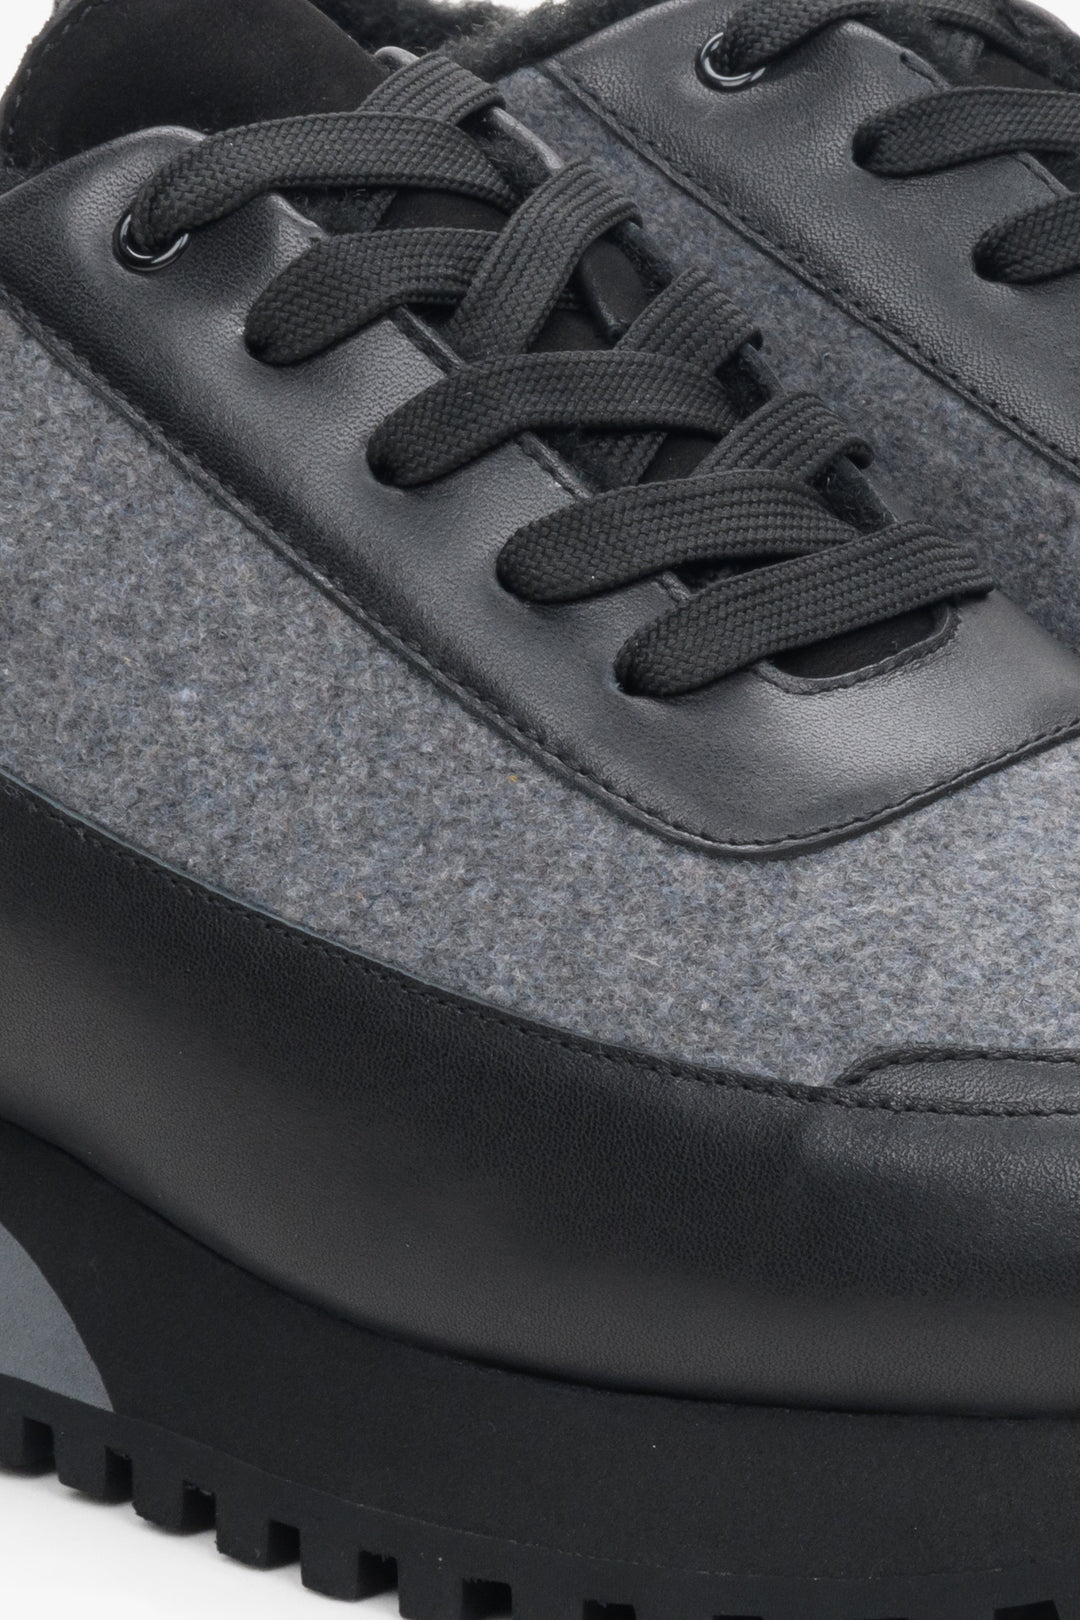 Women's leather sneakers in black and gray by Estro - close-up on the details.